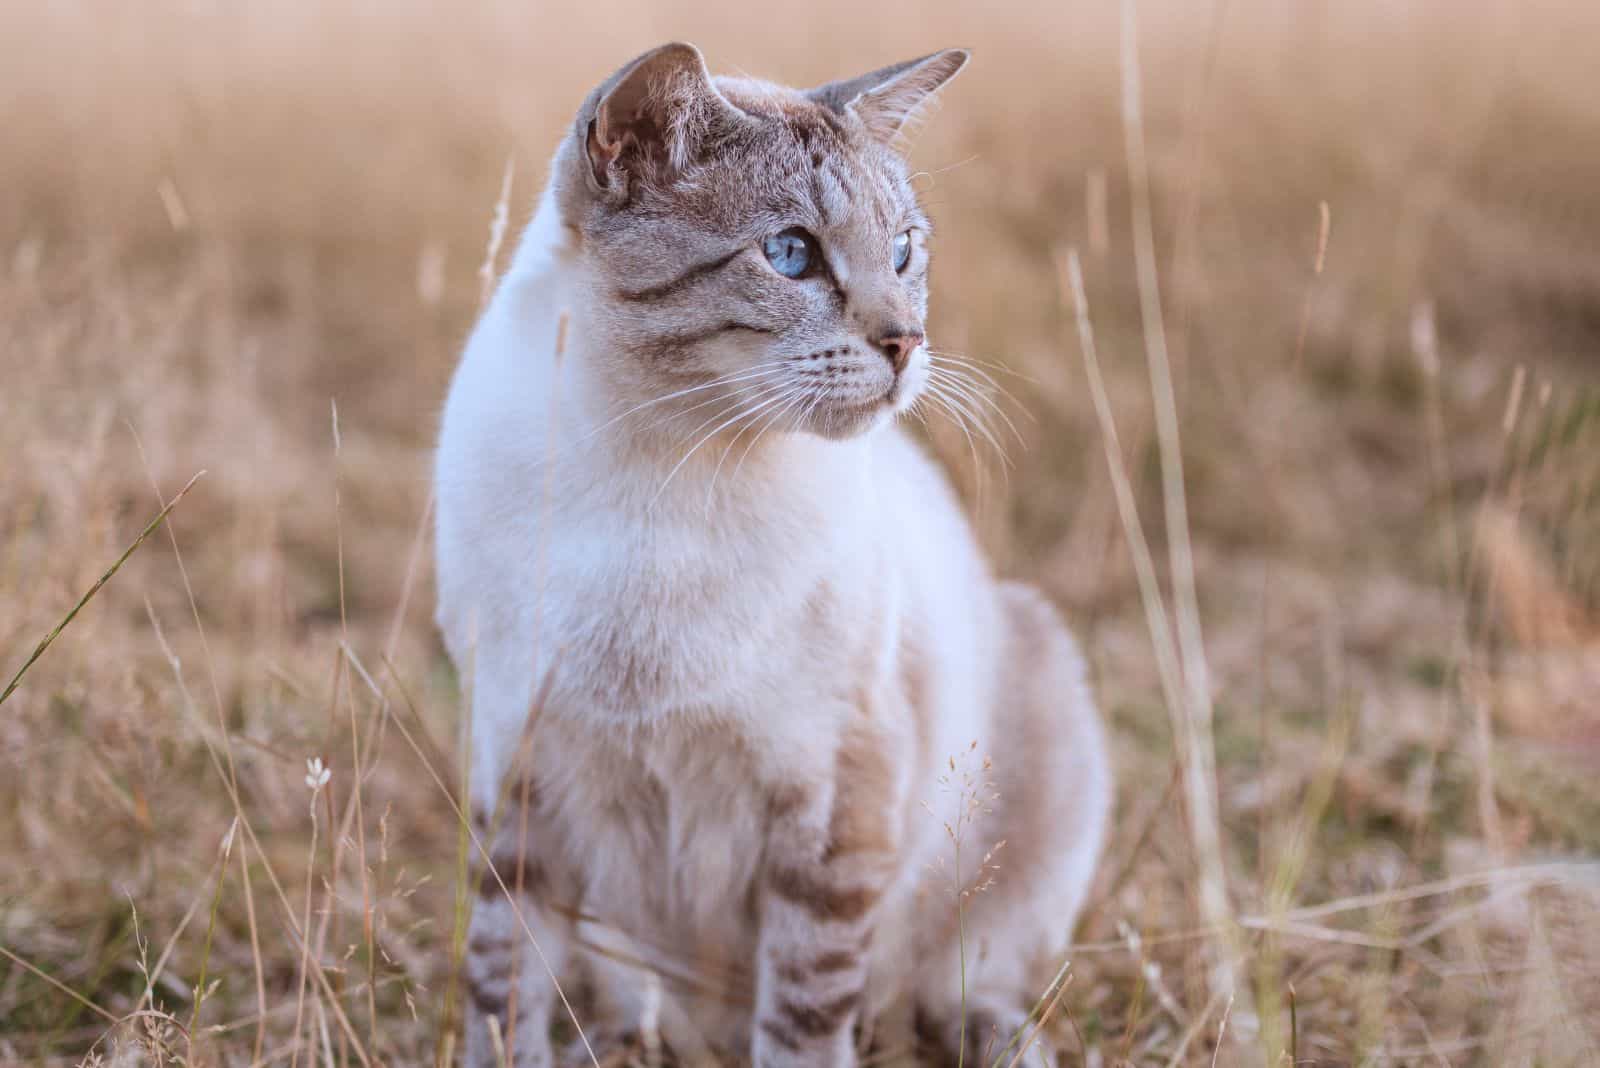 Snow bengal cat in a wild grass